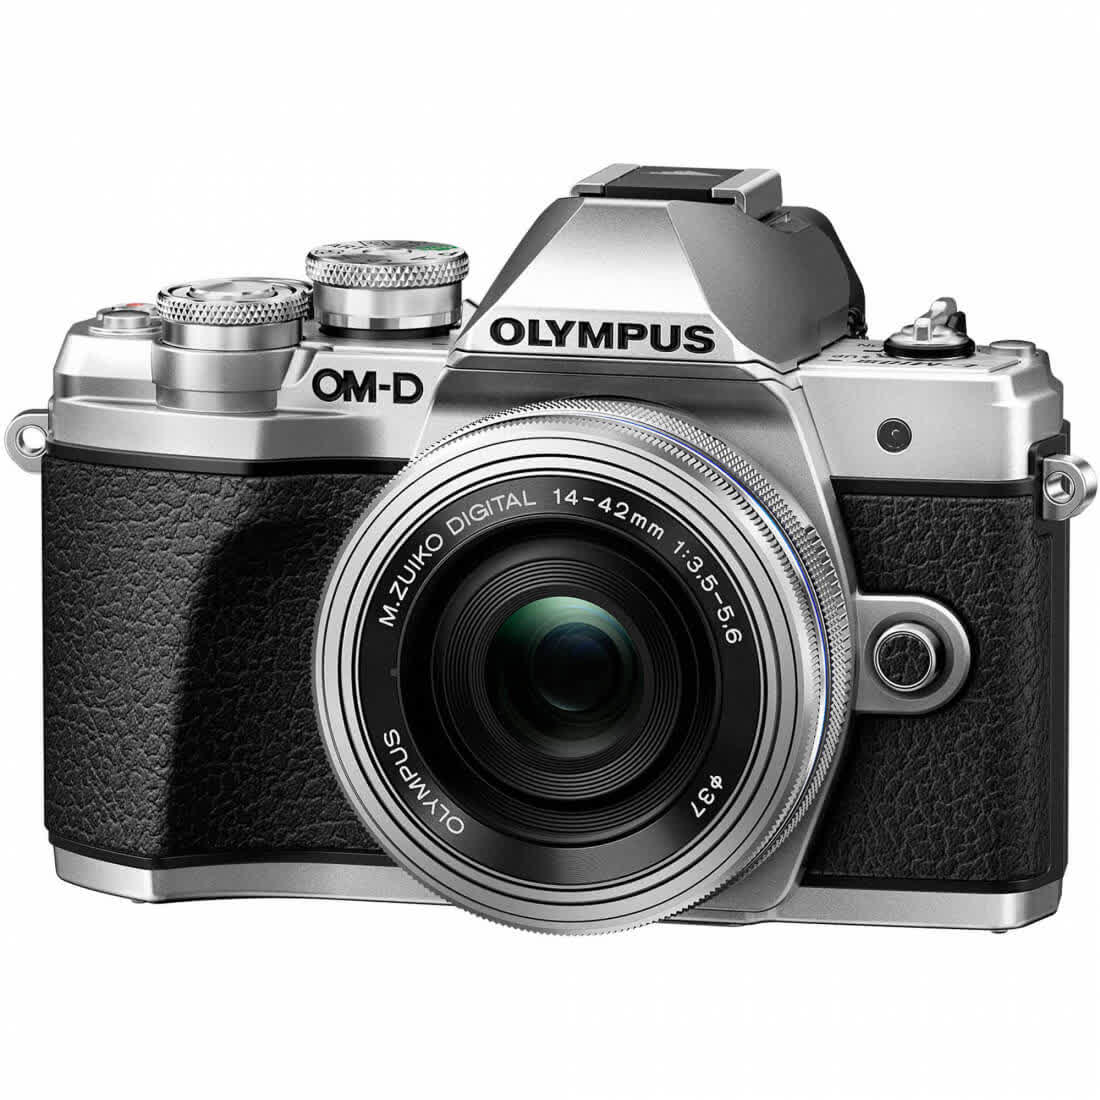 Olympus OM-D E-M10 Mark III Reviews, Pros and Cons | TechSpot